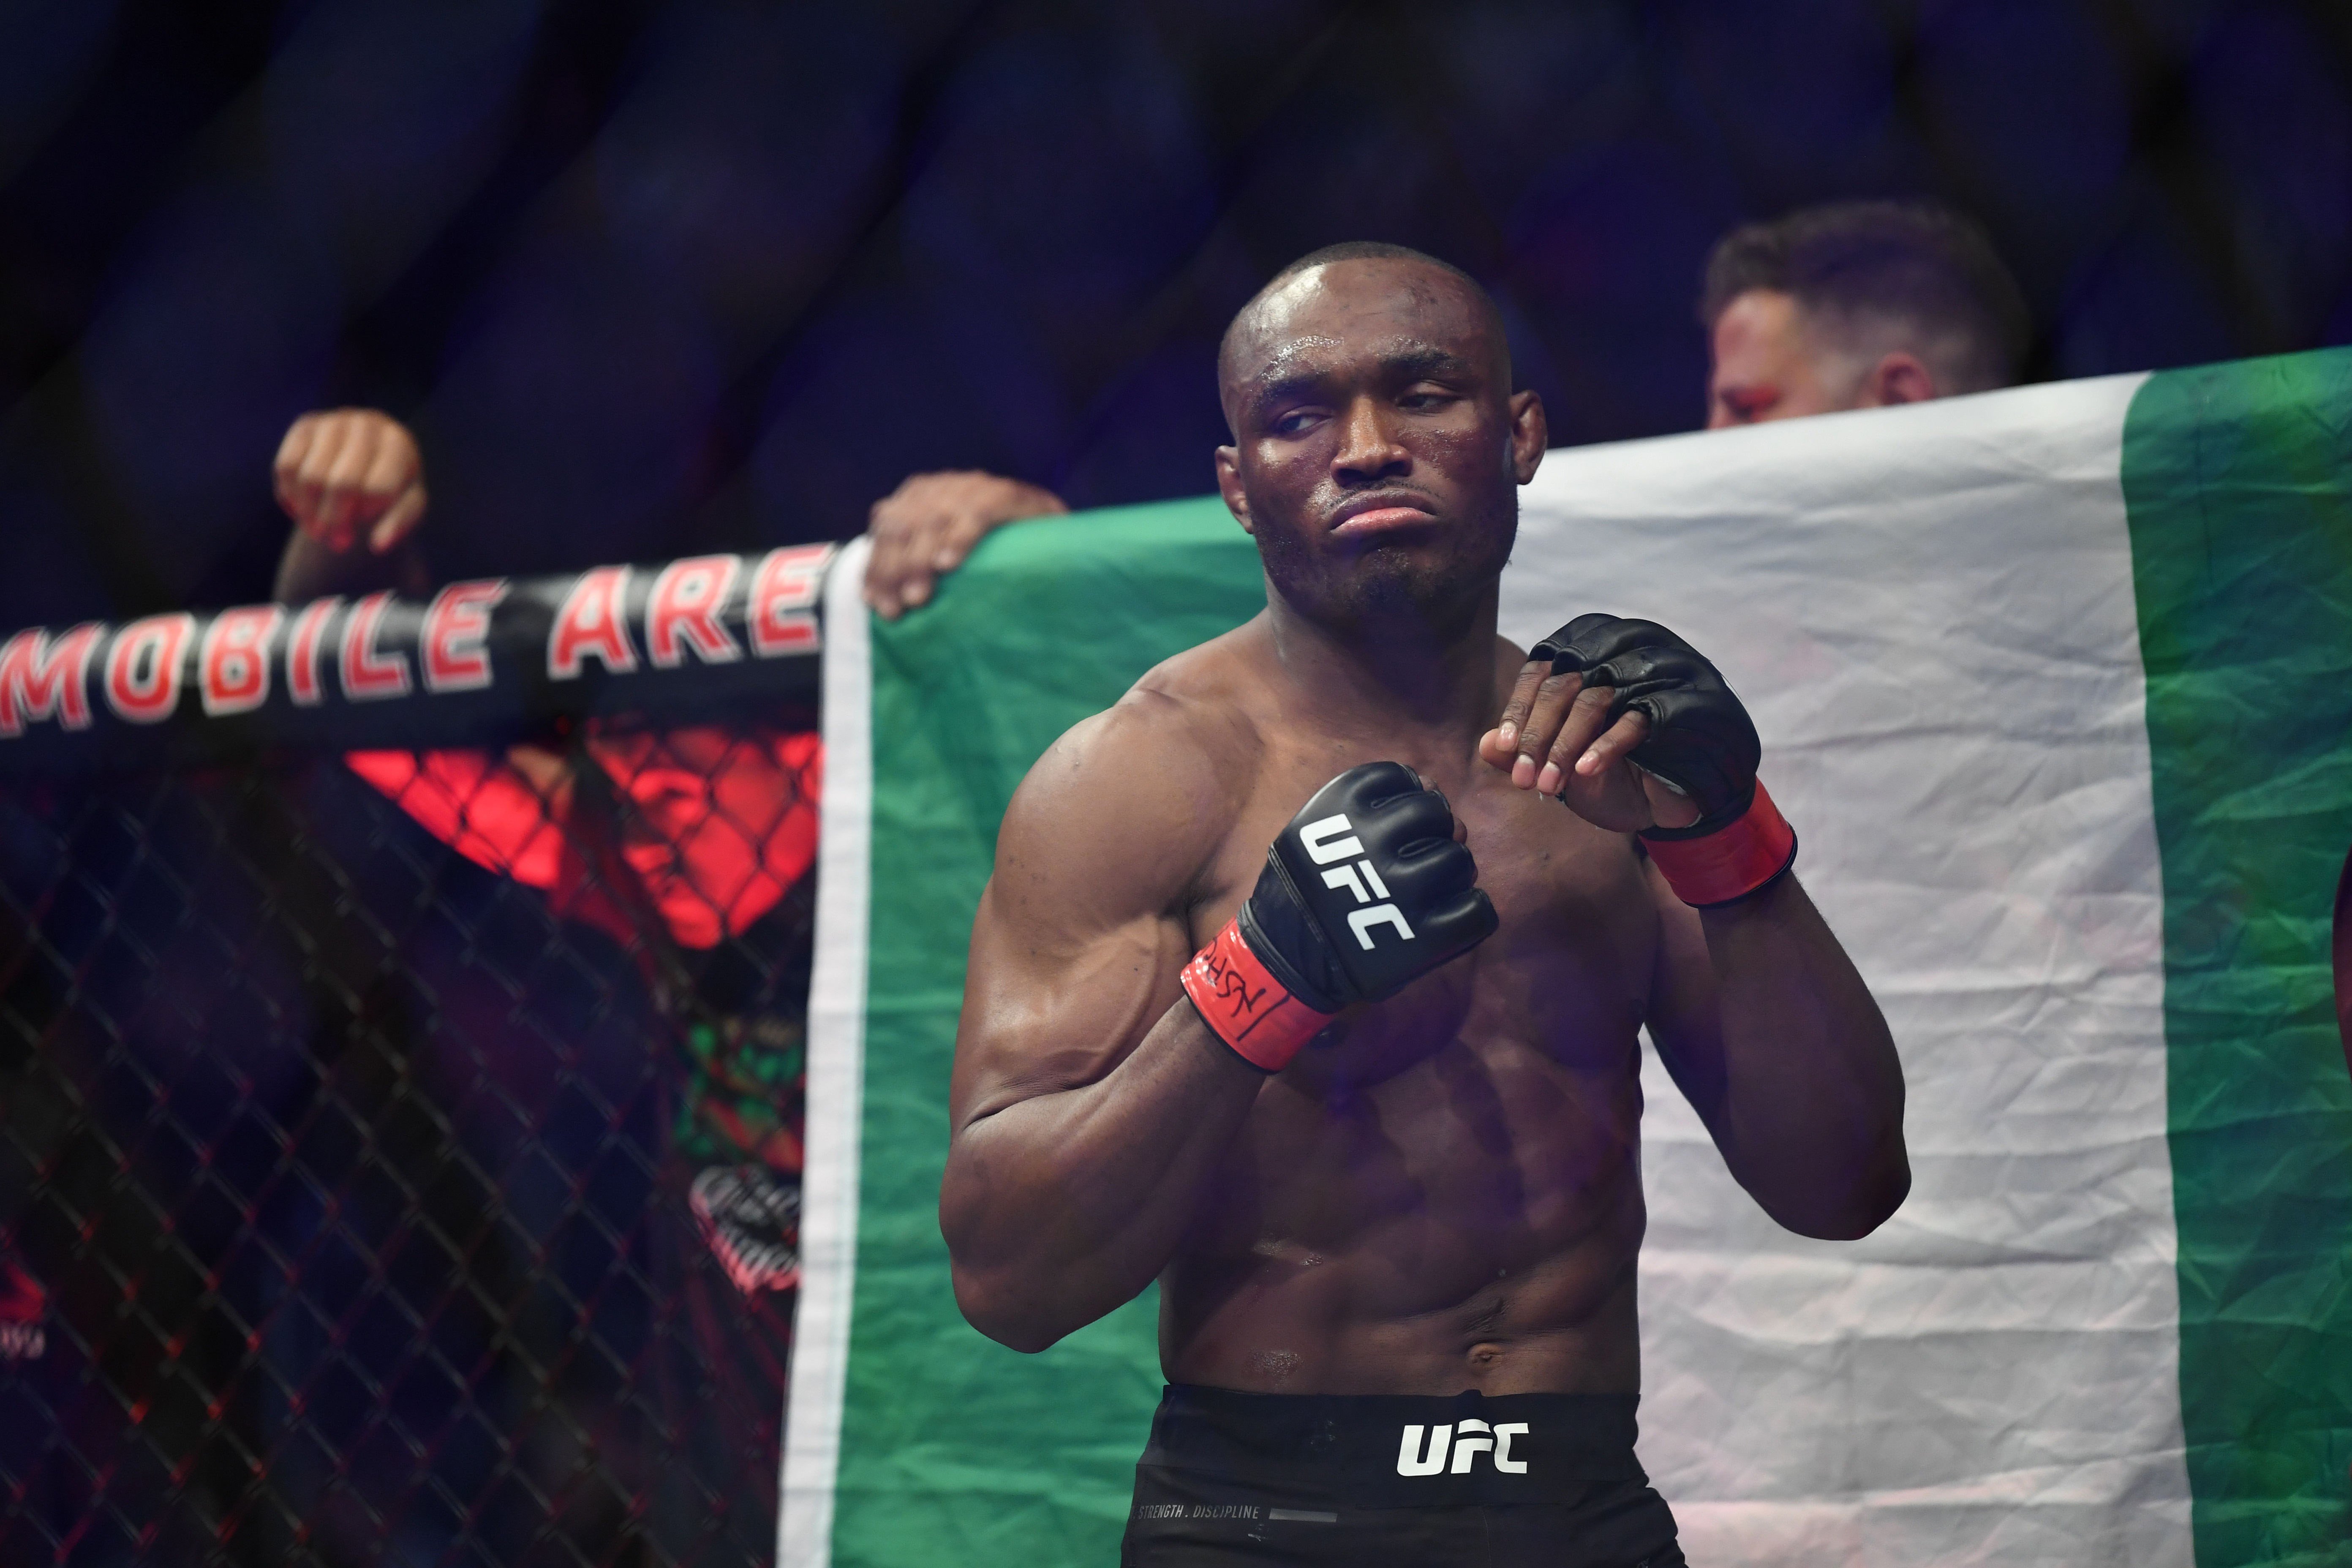 Kamaru Usman ahead of his welterweight title defence against Colby Covington at UFC 245. Photo: USA Today Sports